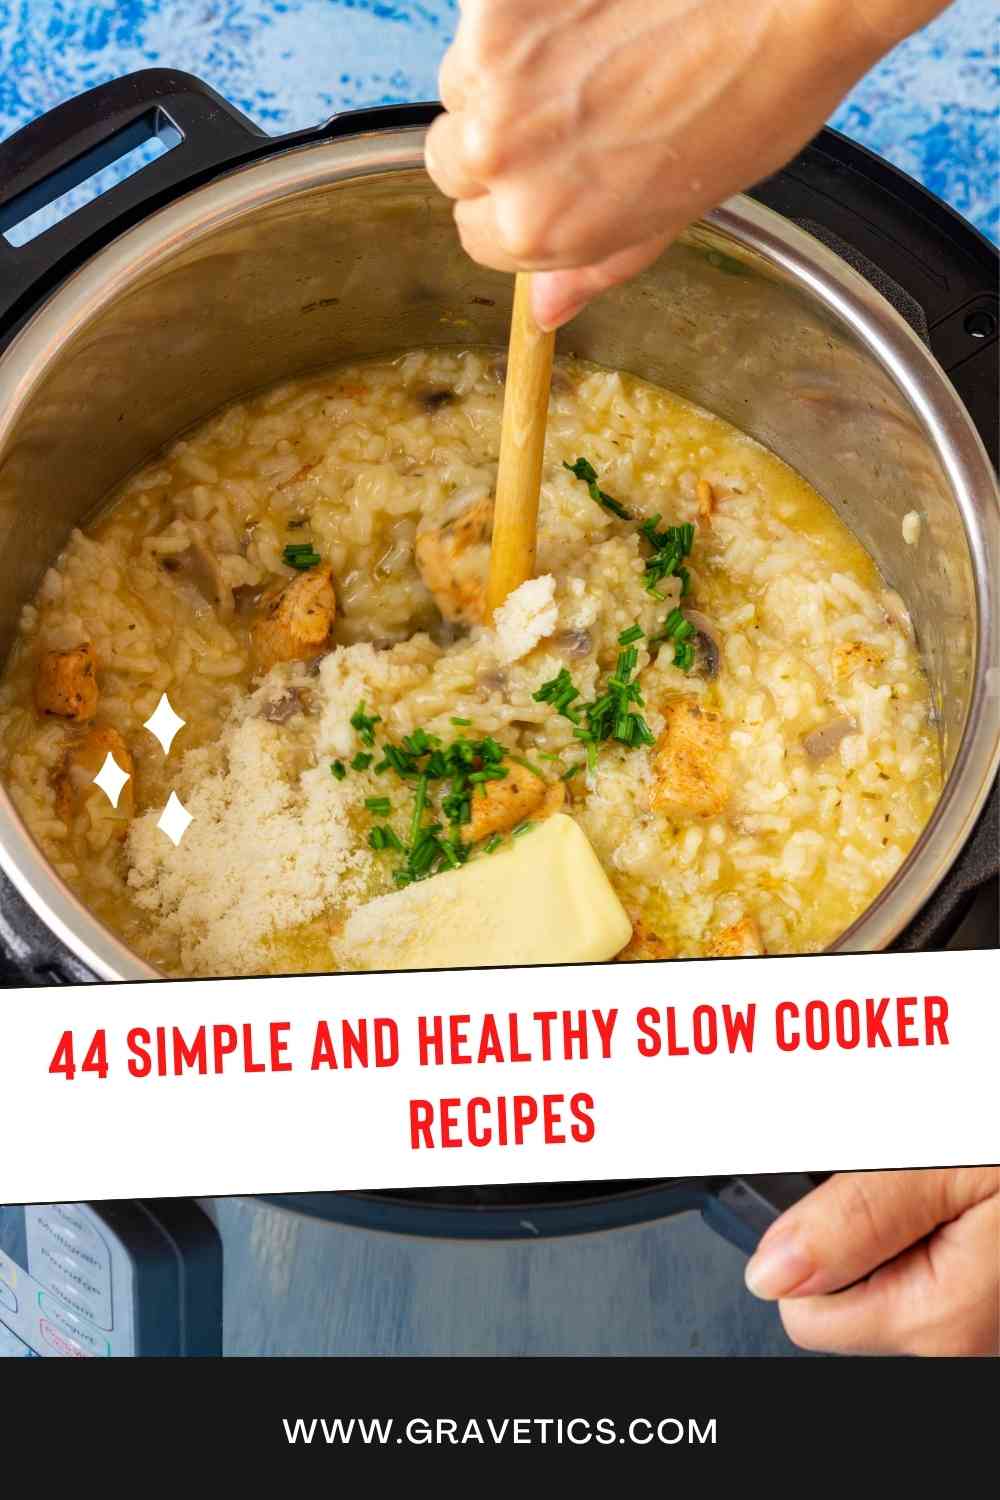 44 Simple and Healthy Slow Cooker Recipes